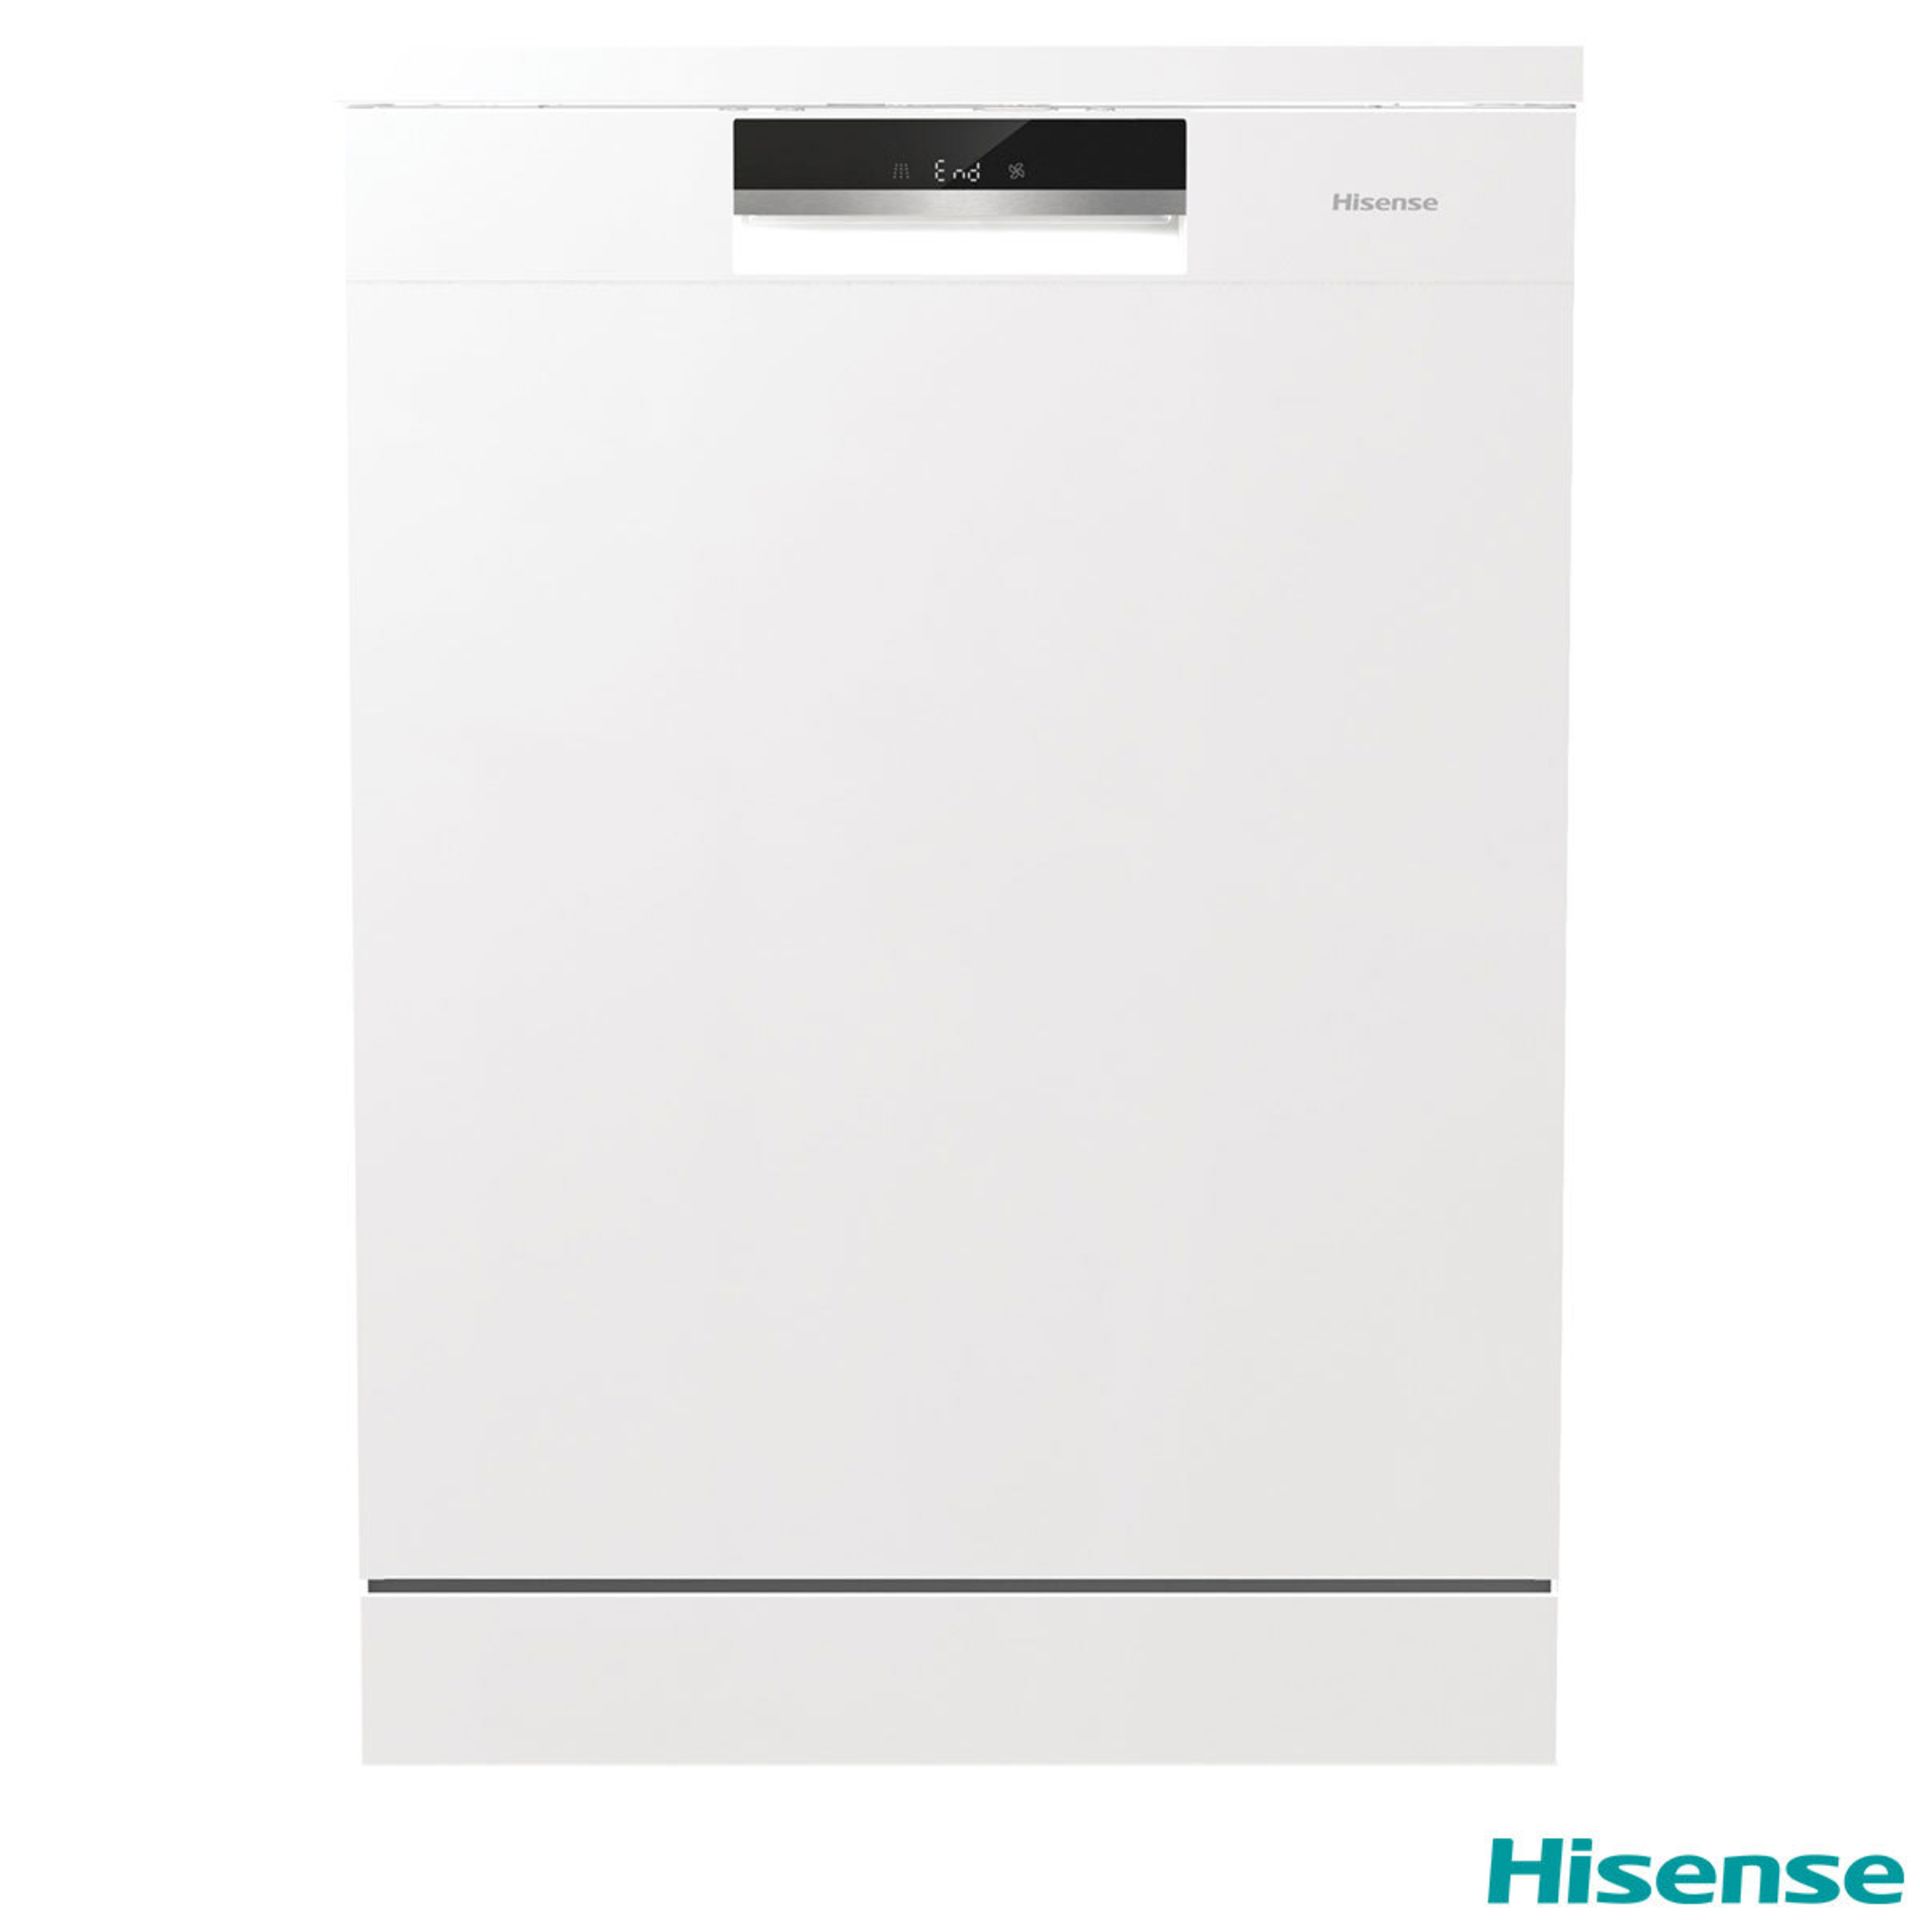 Hisense dishwasher, powers on but we haven't connected it to water to check any further